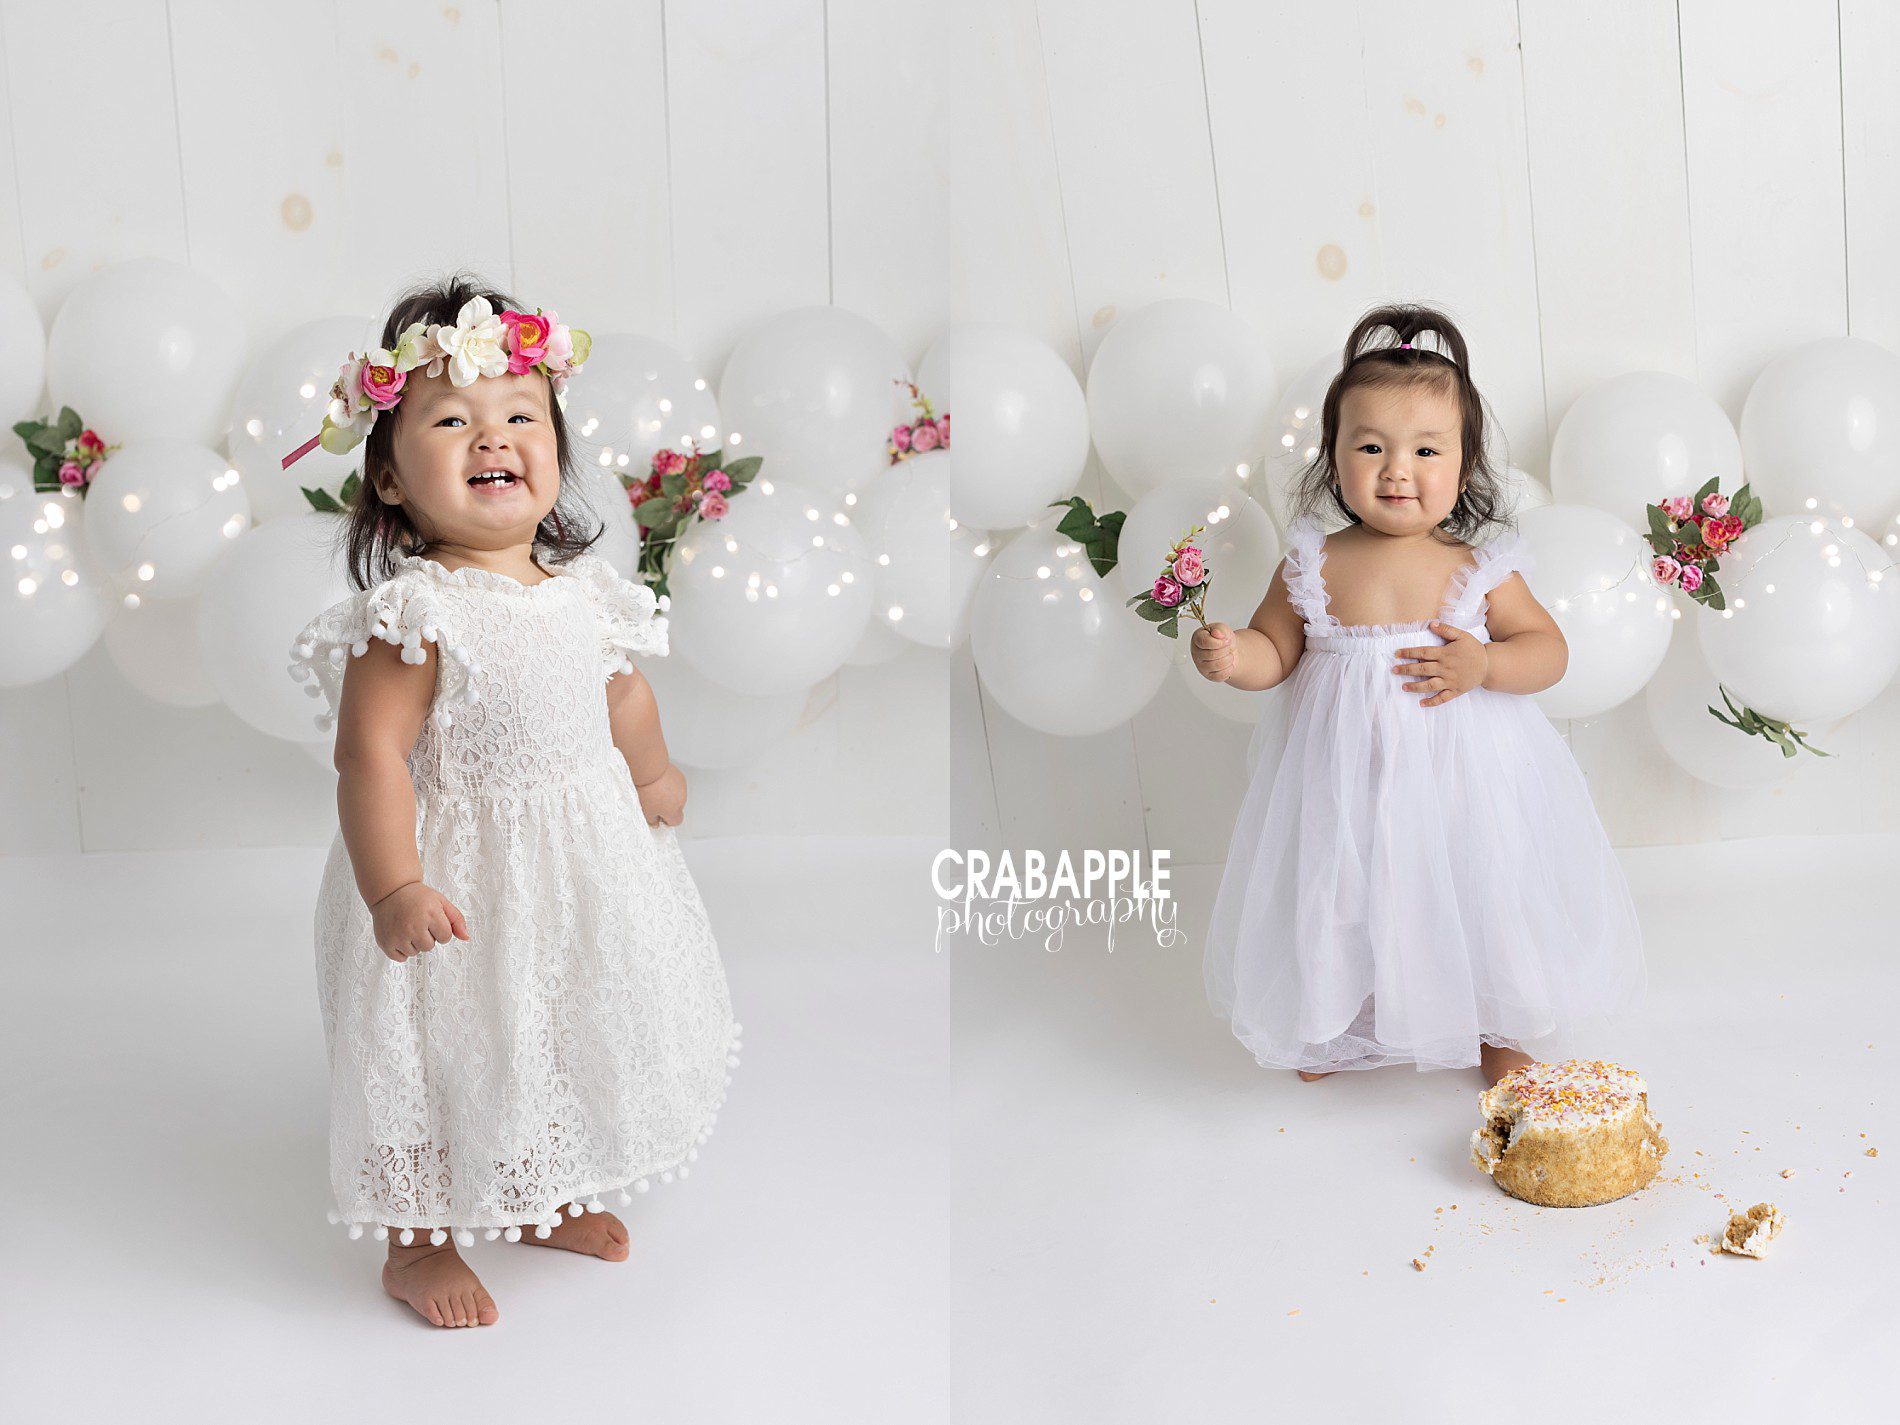 monochromatic white cake smash and 1 year photo ideas light and airy